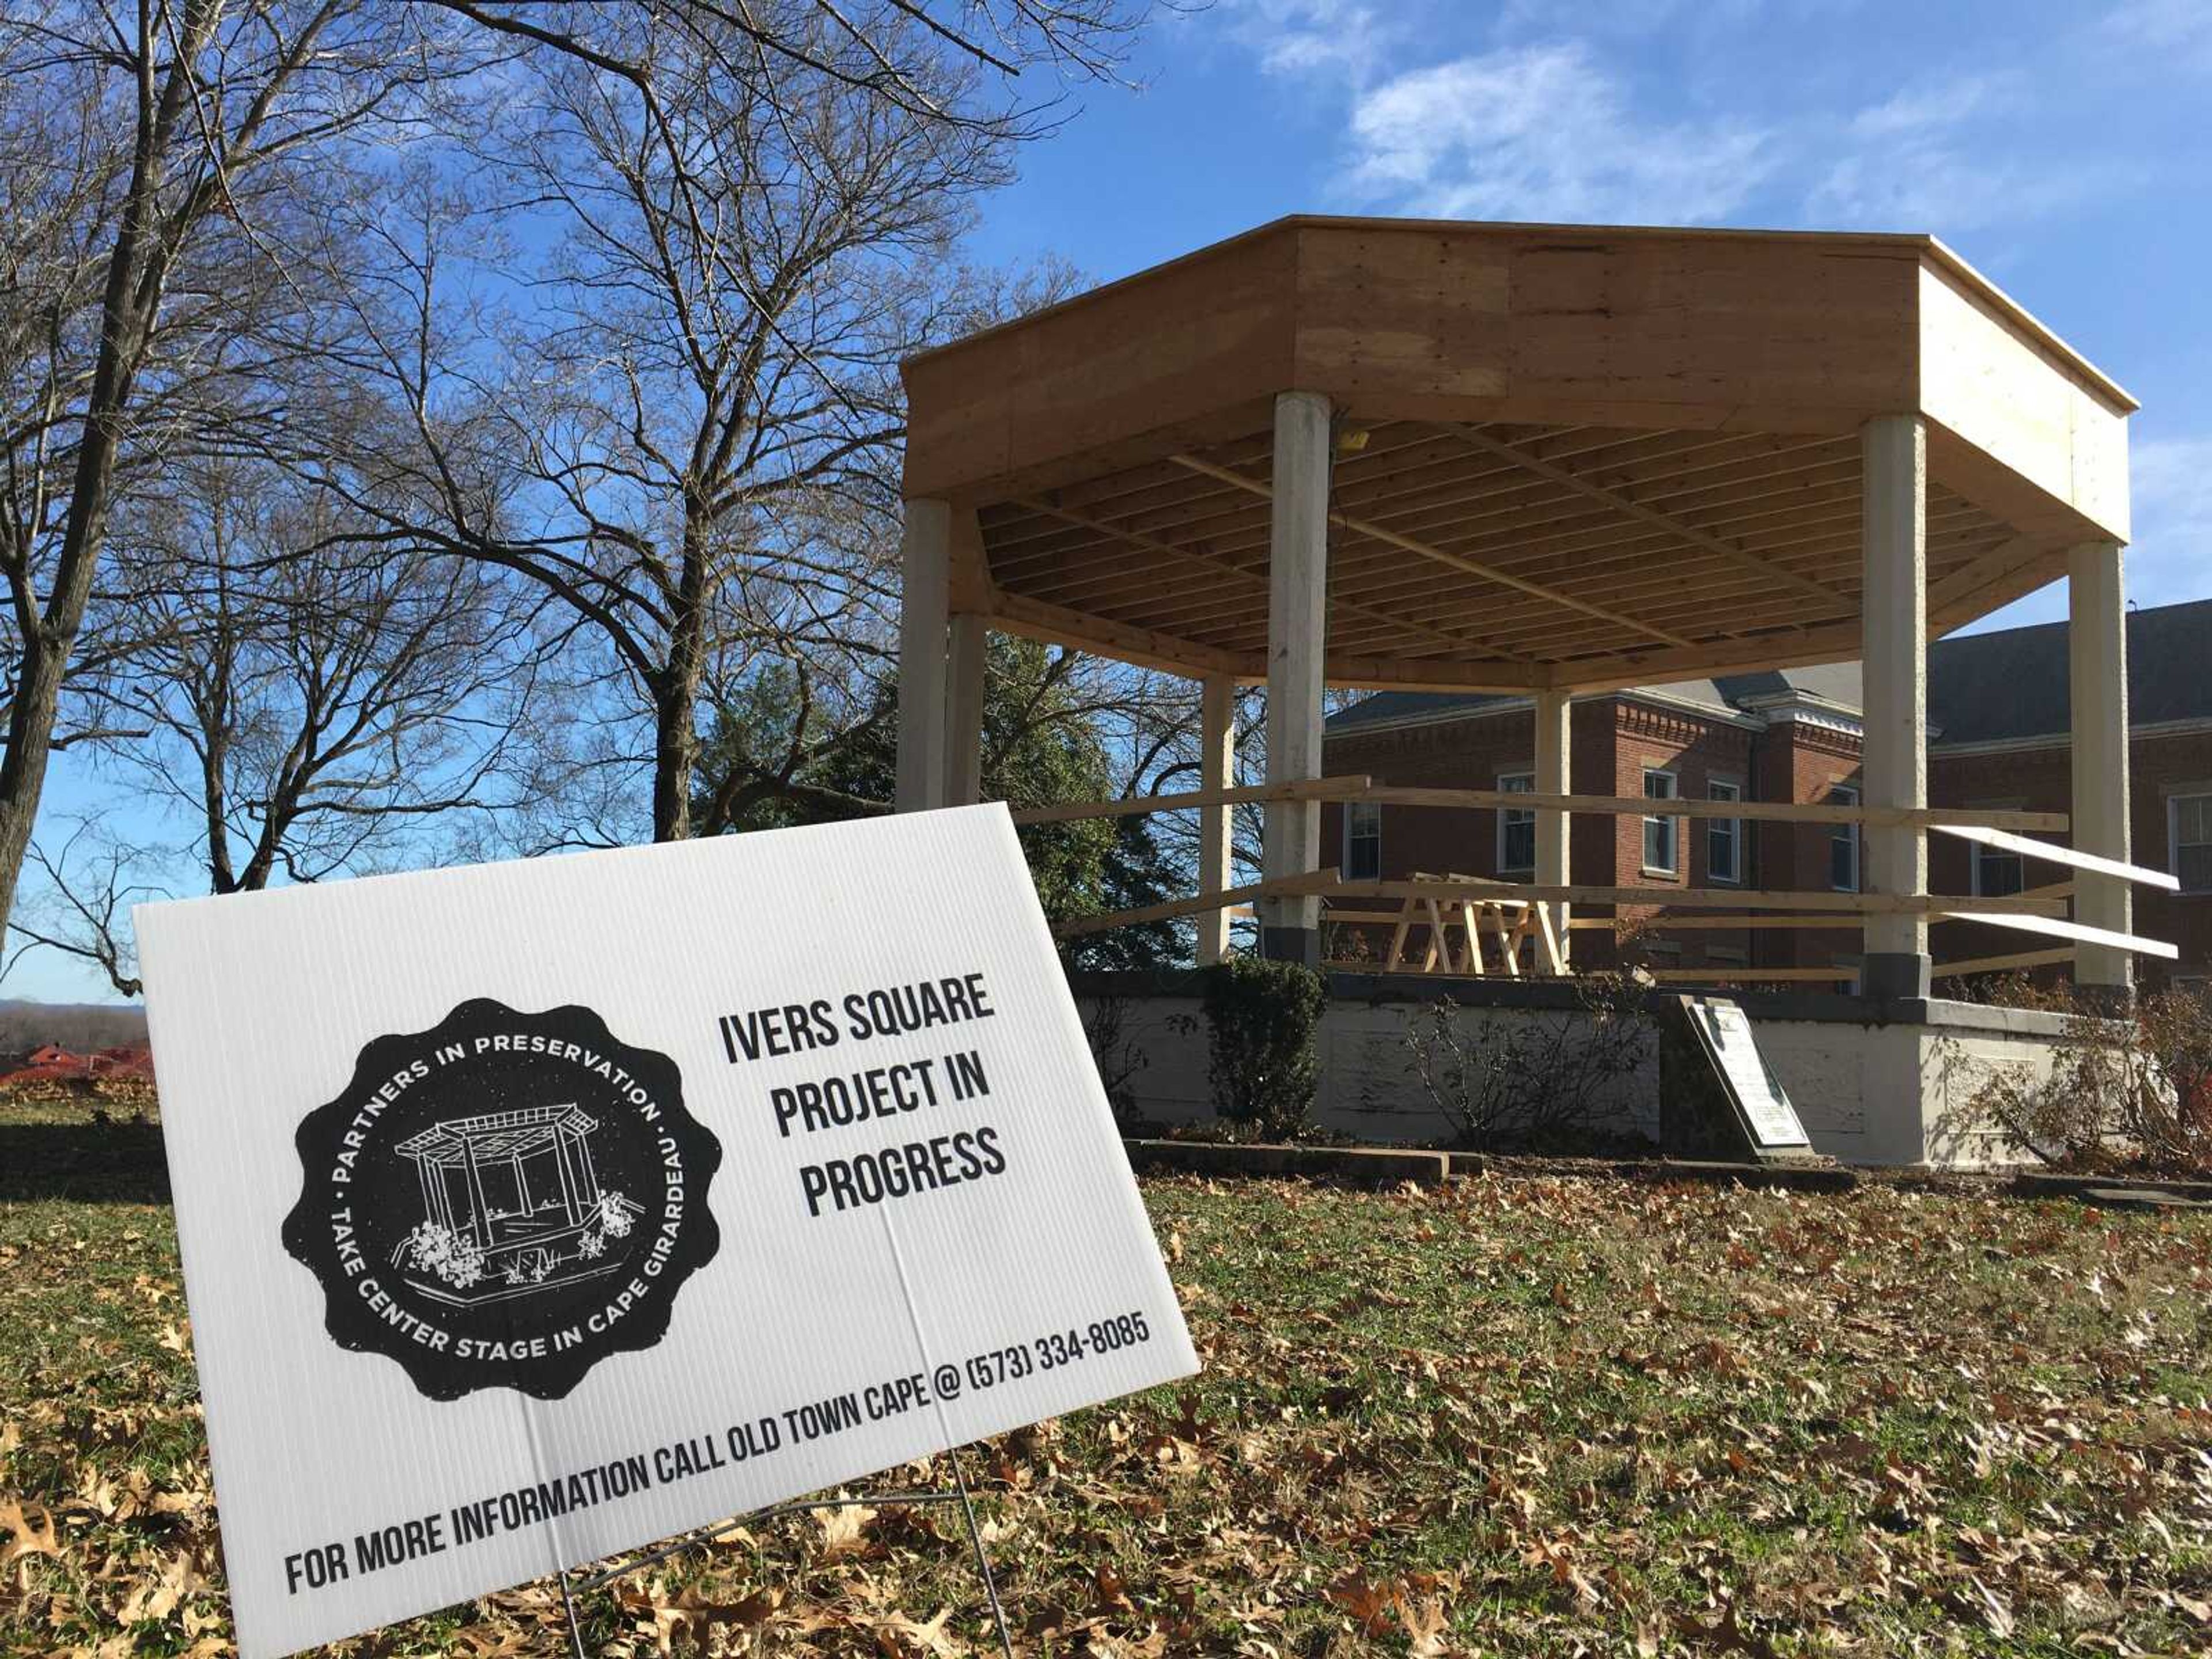 Ivers Square gazebo reconstruction scheduled to be done by May 6 in time for Tunes at Twilight in the 2019 series.